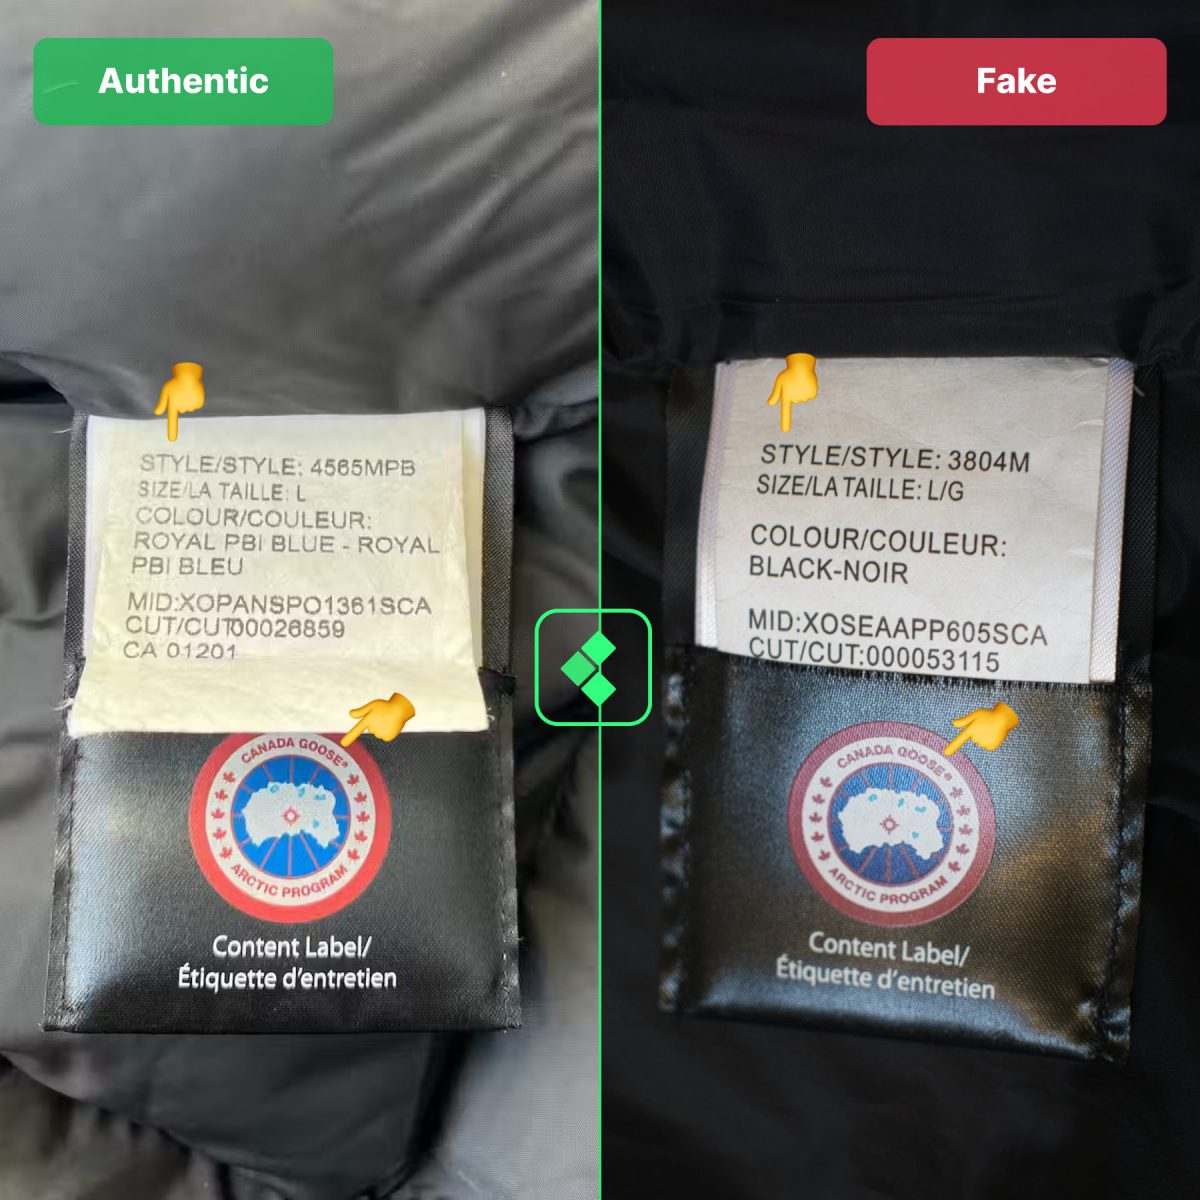 Comparison of the real vs fake Canada Goose Jackets: Content Labels